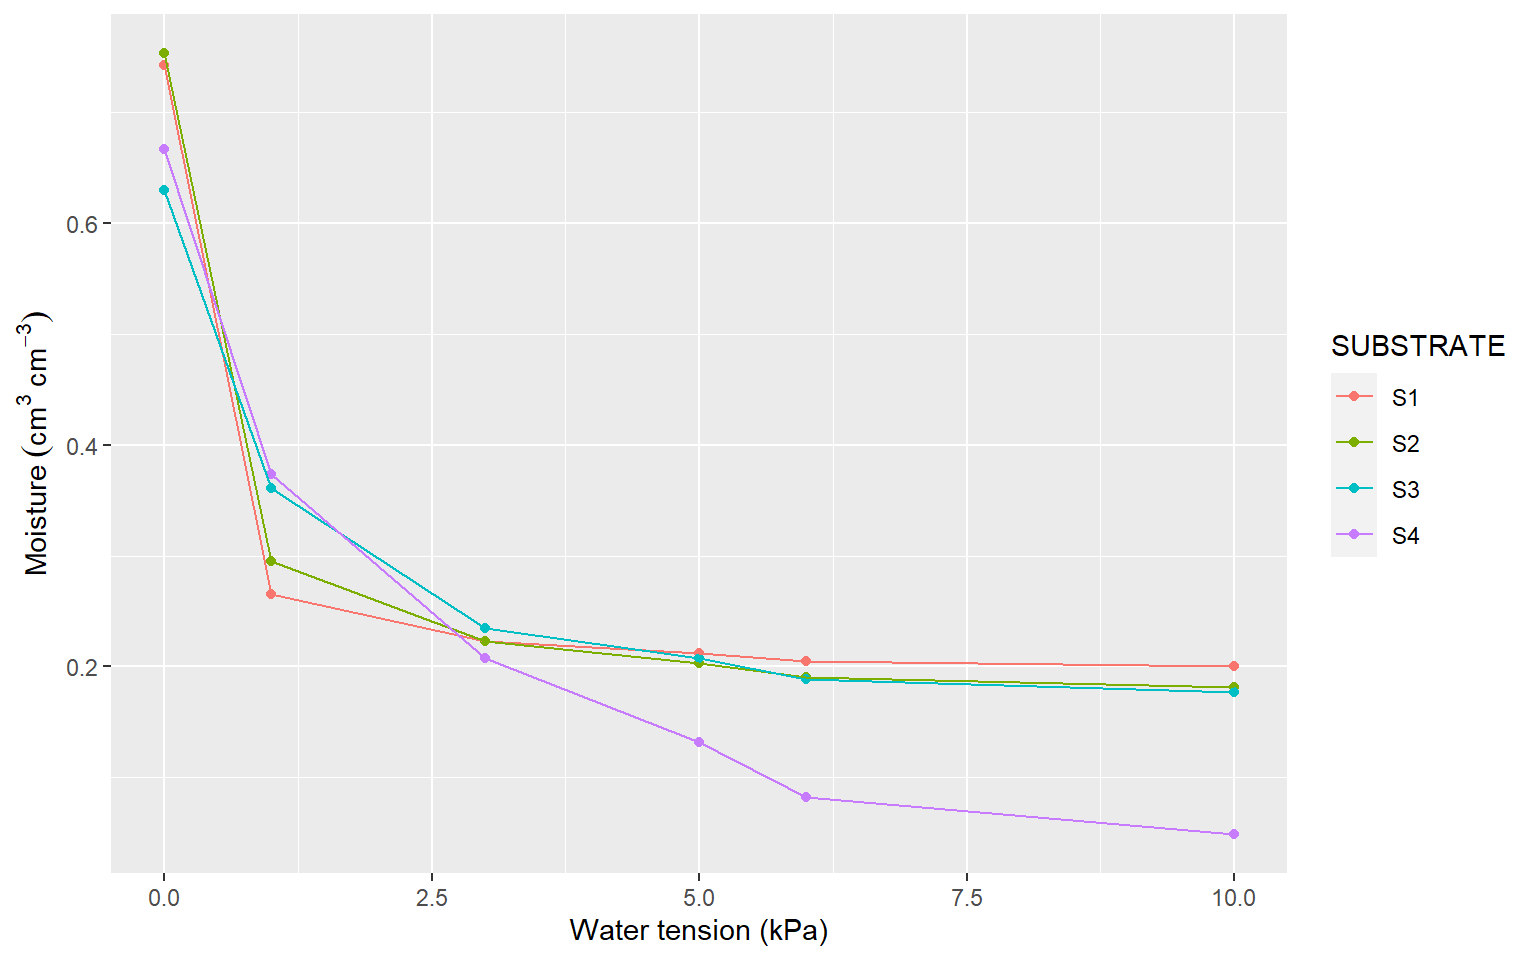 Water retention curve for different substrates used in the experiment.